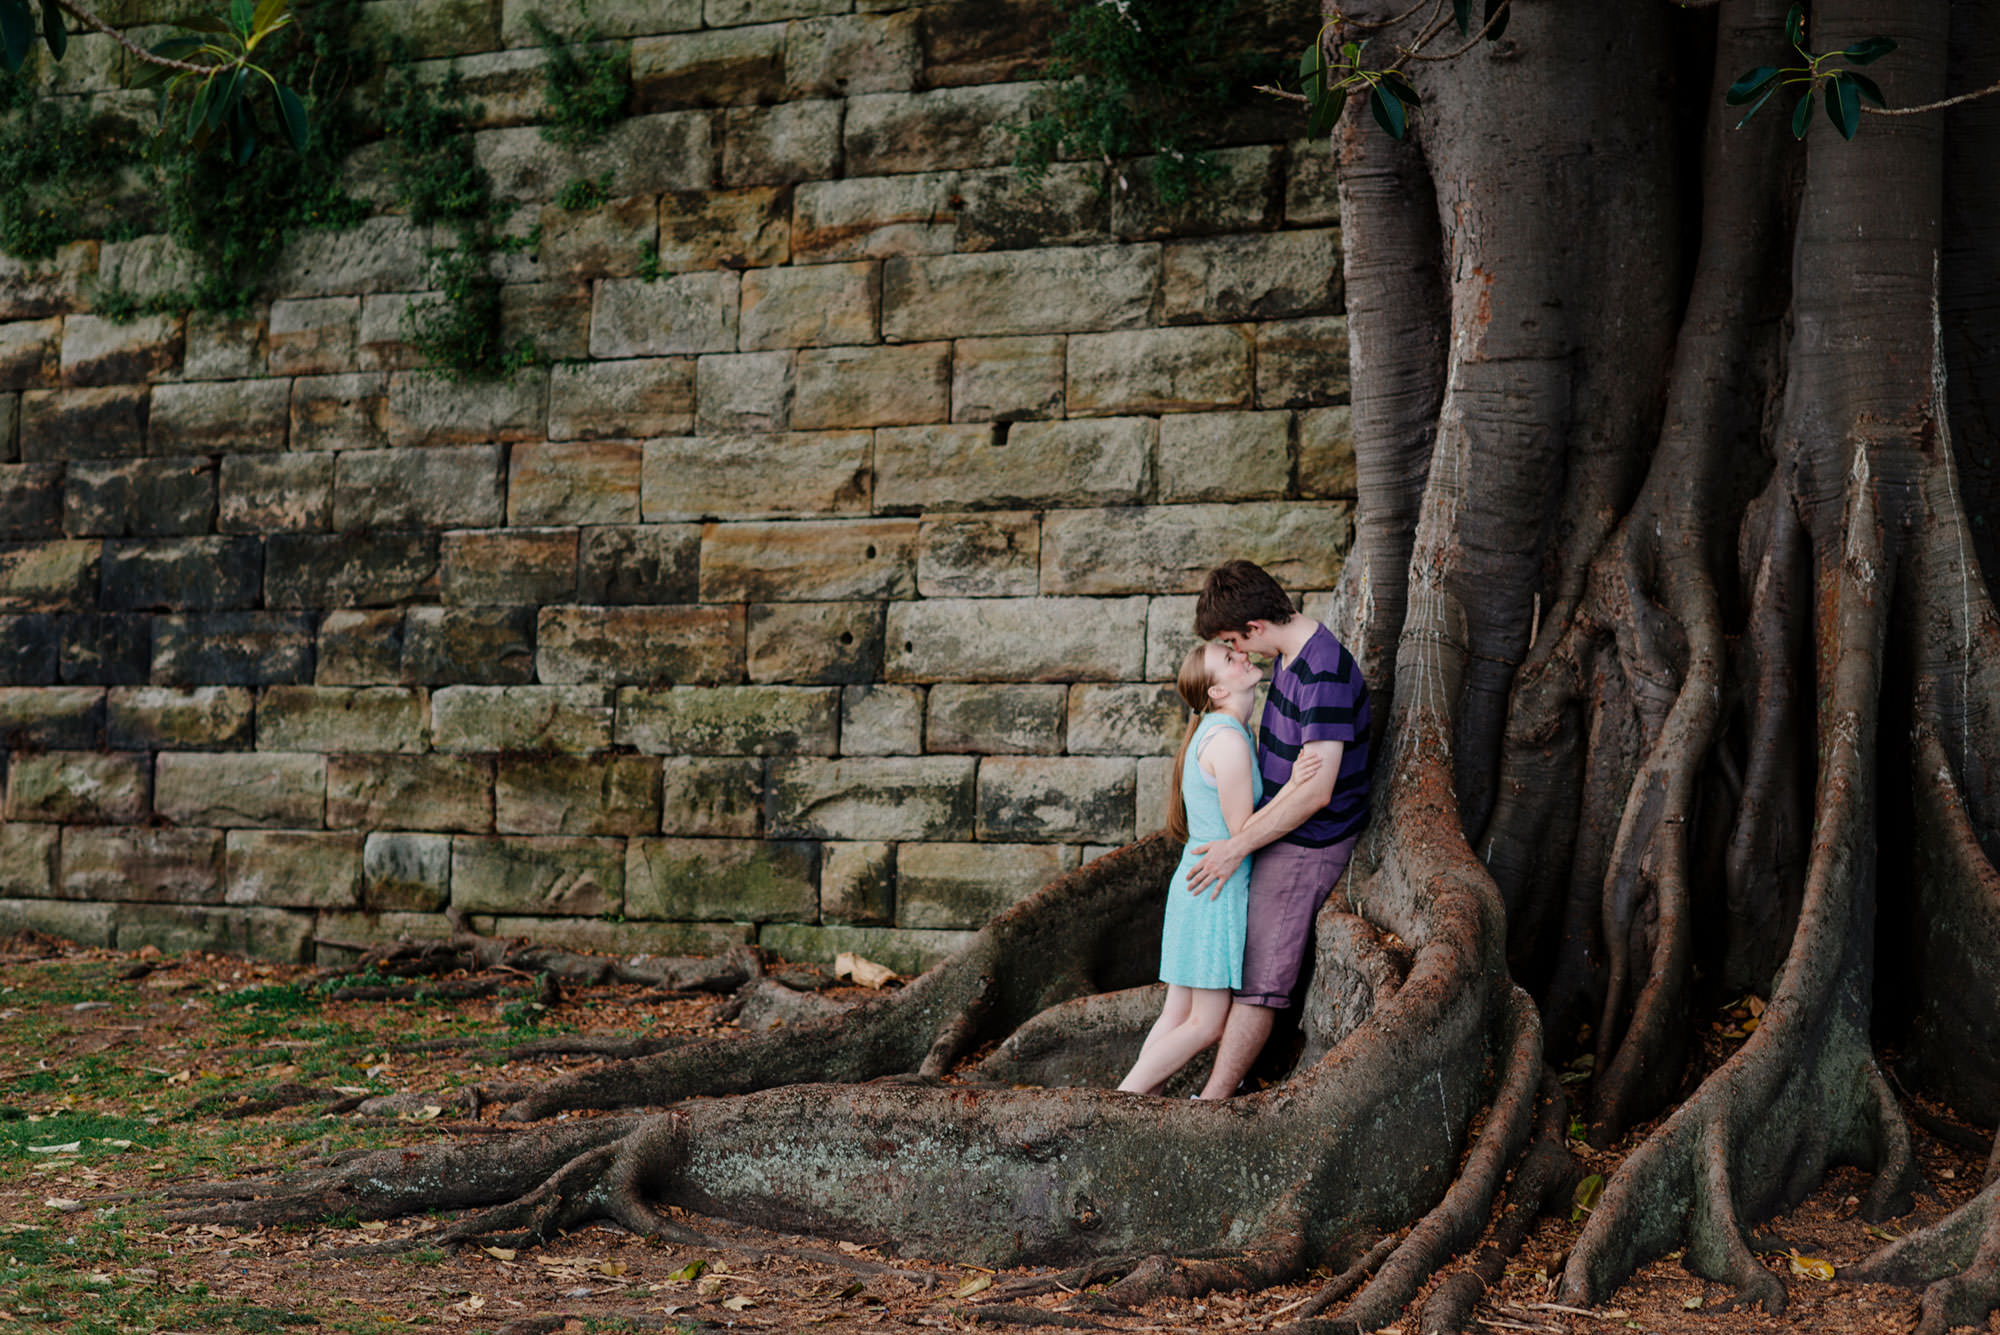 Peter and Jodie under the Morten Bay Fig